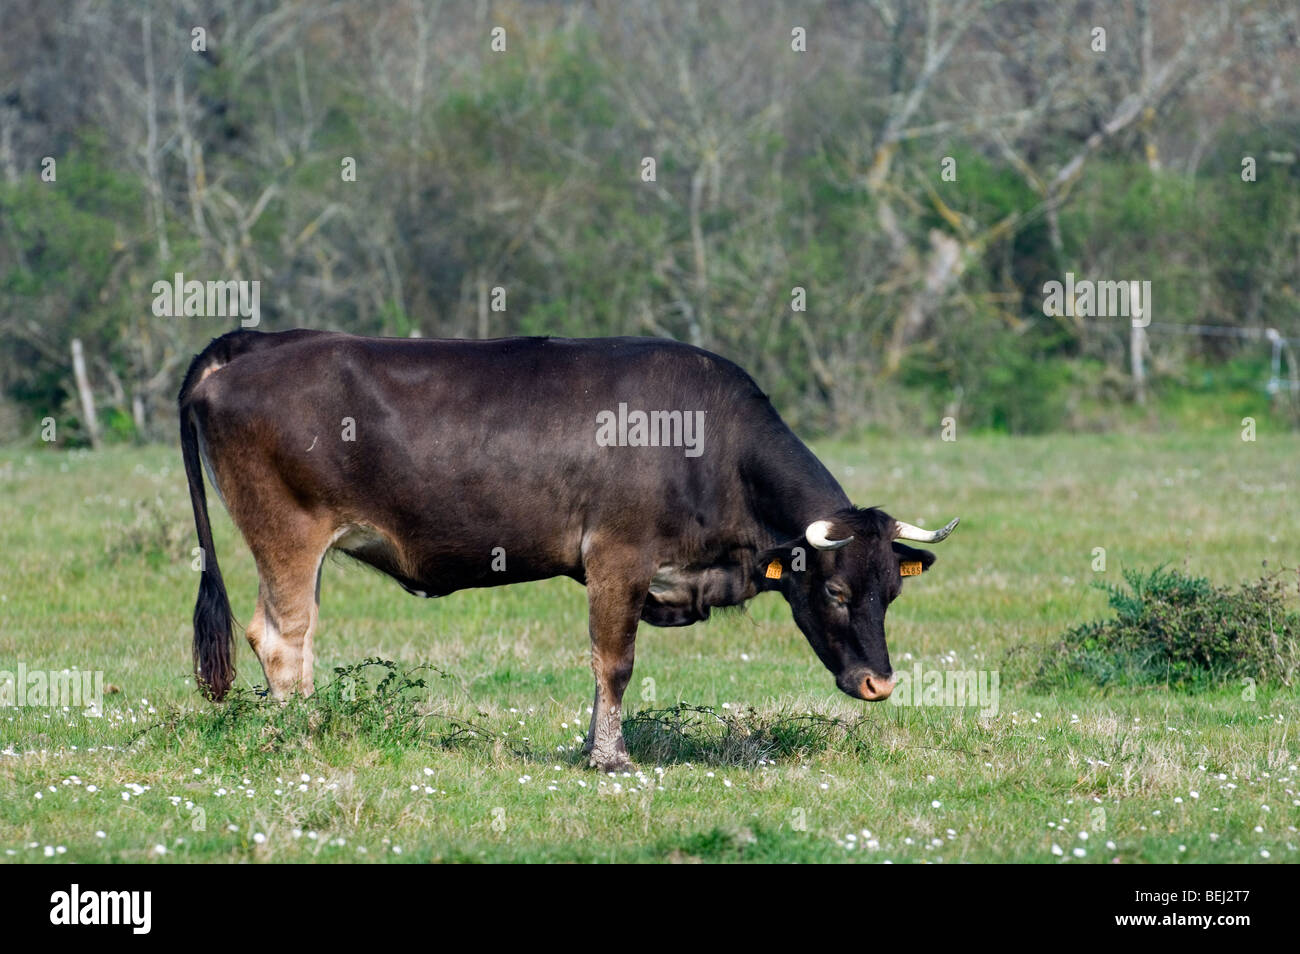 Aure et Saint-Girons / Casta cow, French breed of cattle grazing in field, La Brenne, France Stock Photo